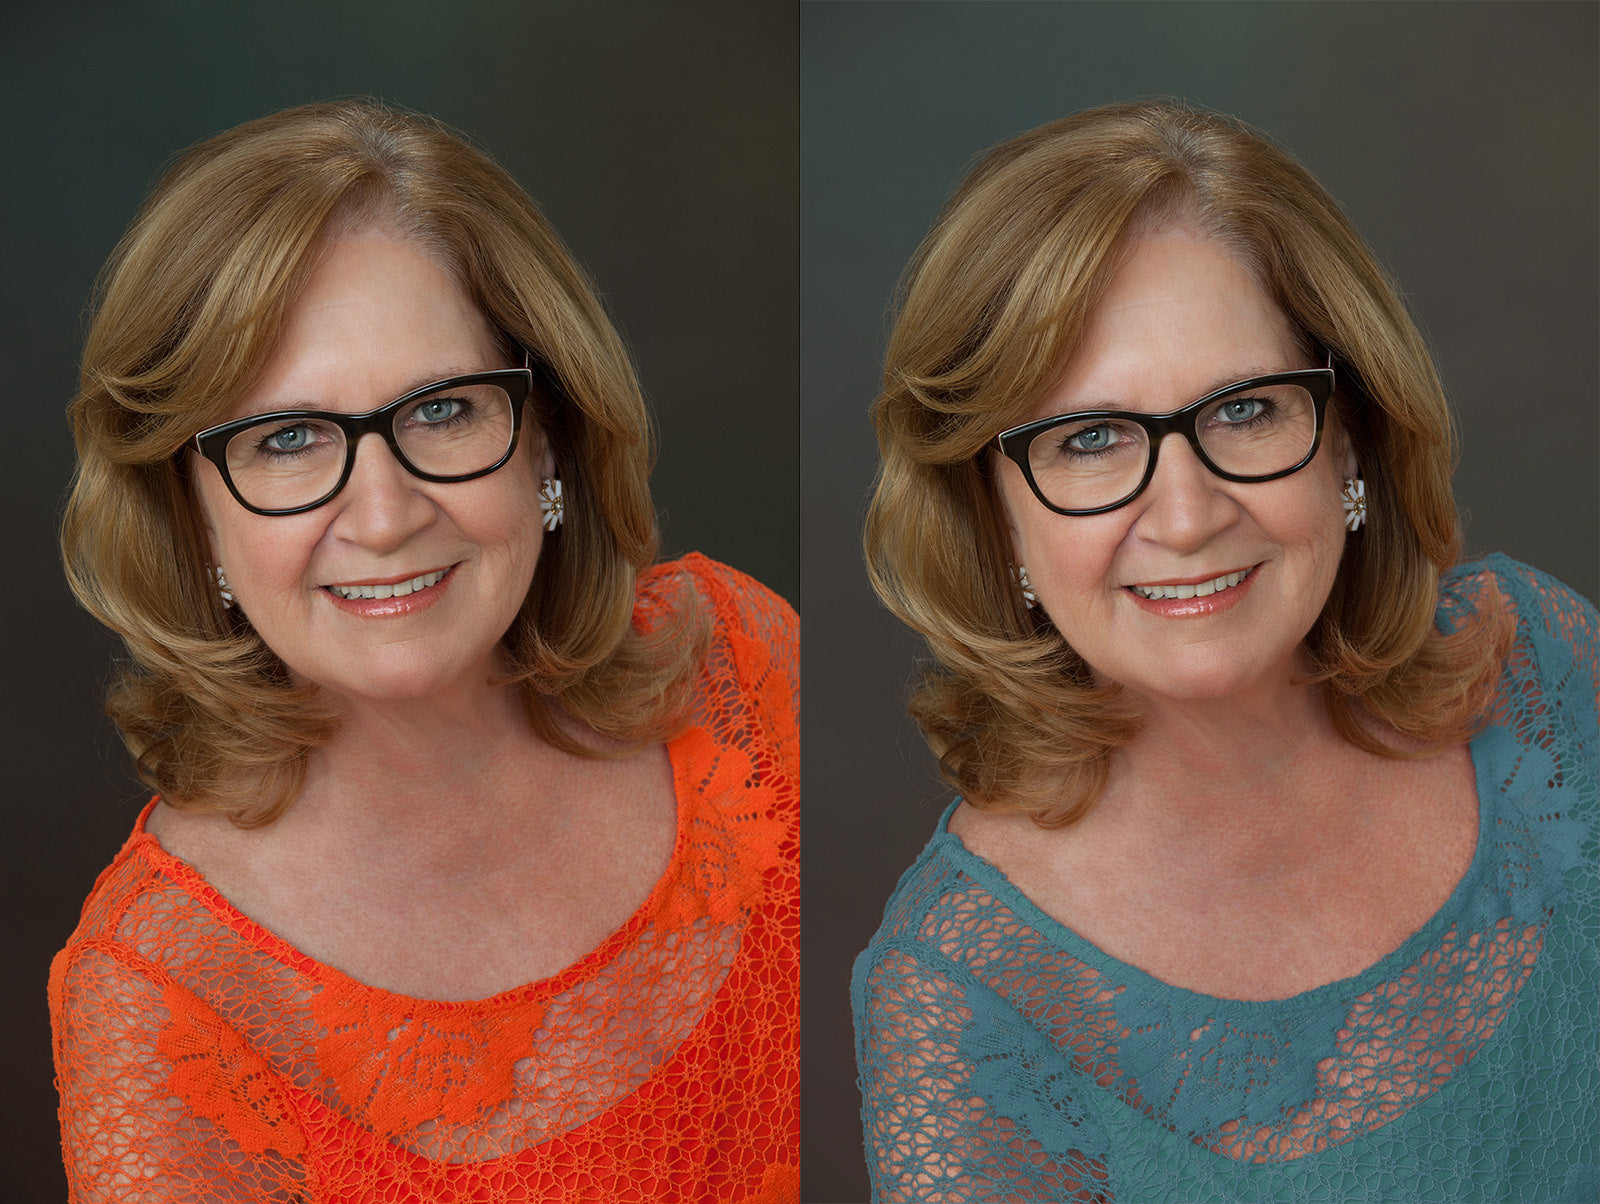 Woman with glasses wearing an orange blouse vs wearing a blue greenish one